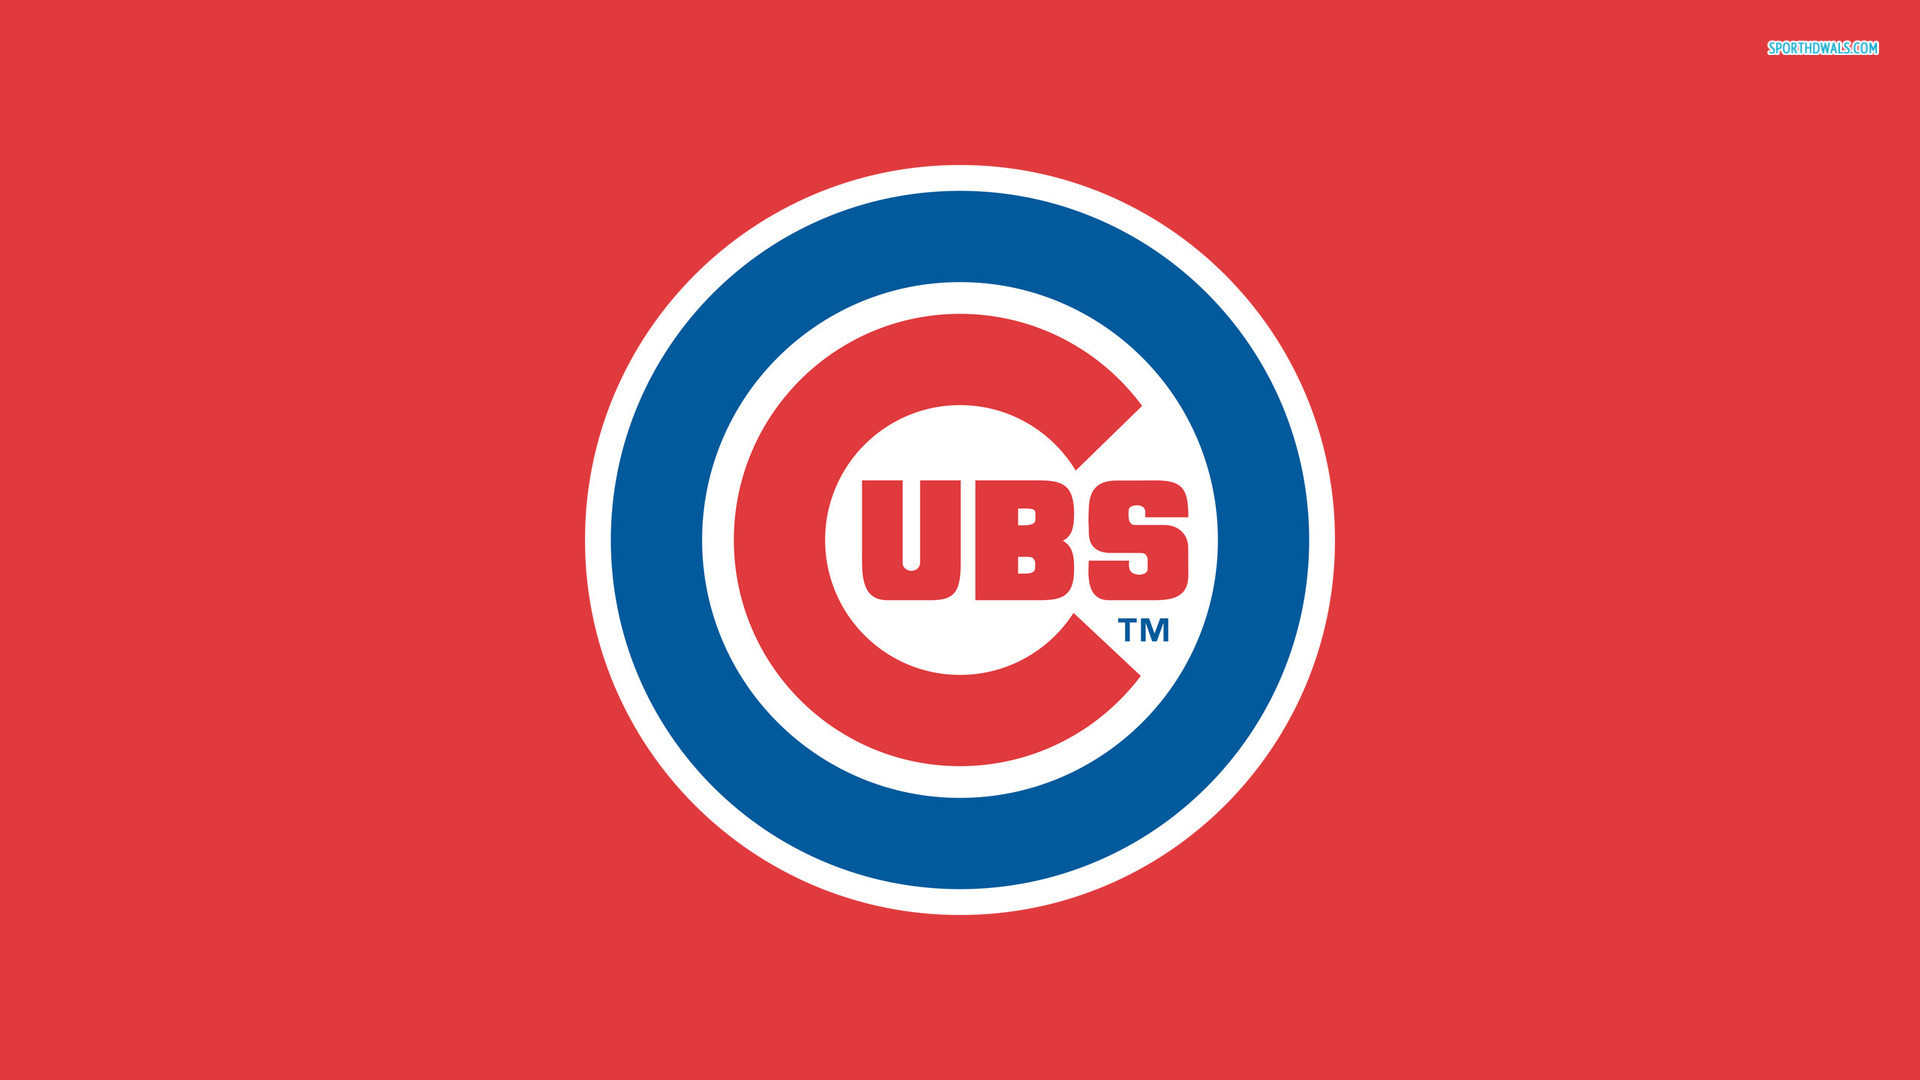 1920x1080 New Chicago Cubs Wallpaper View #993603 Wallpapers | RiseWLP